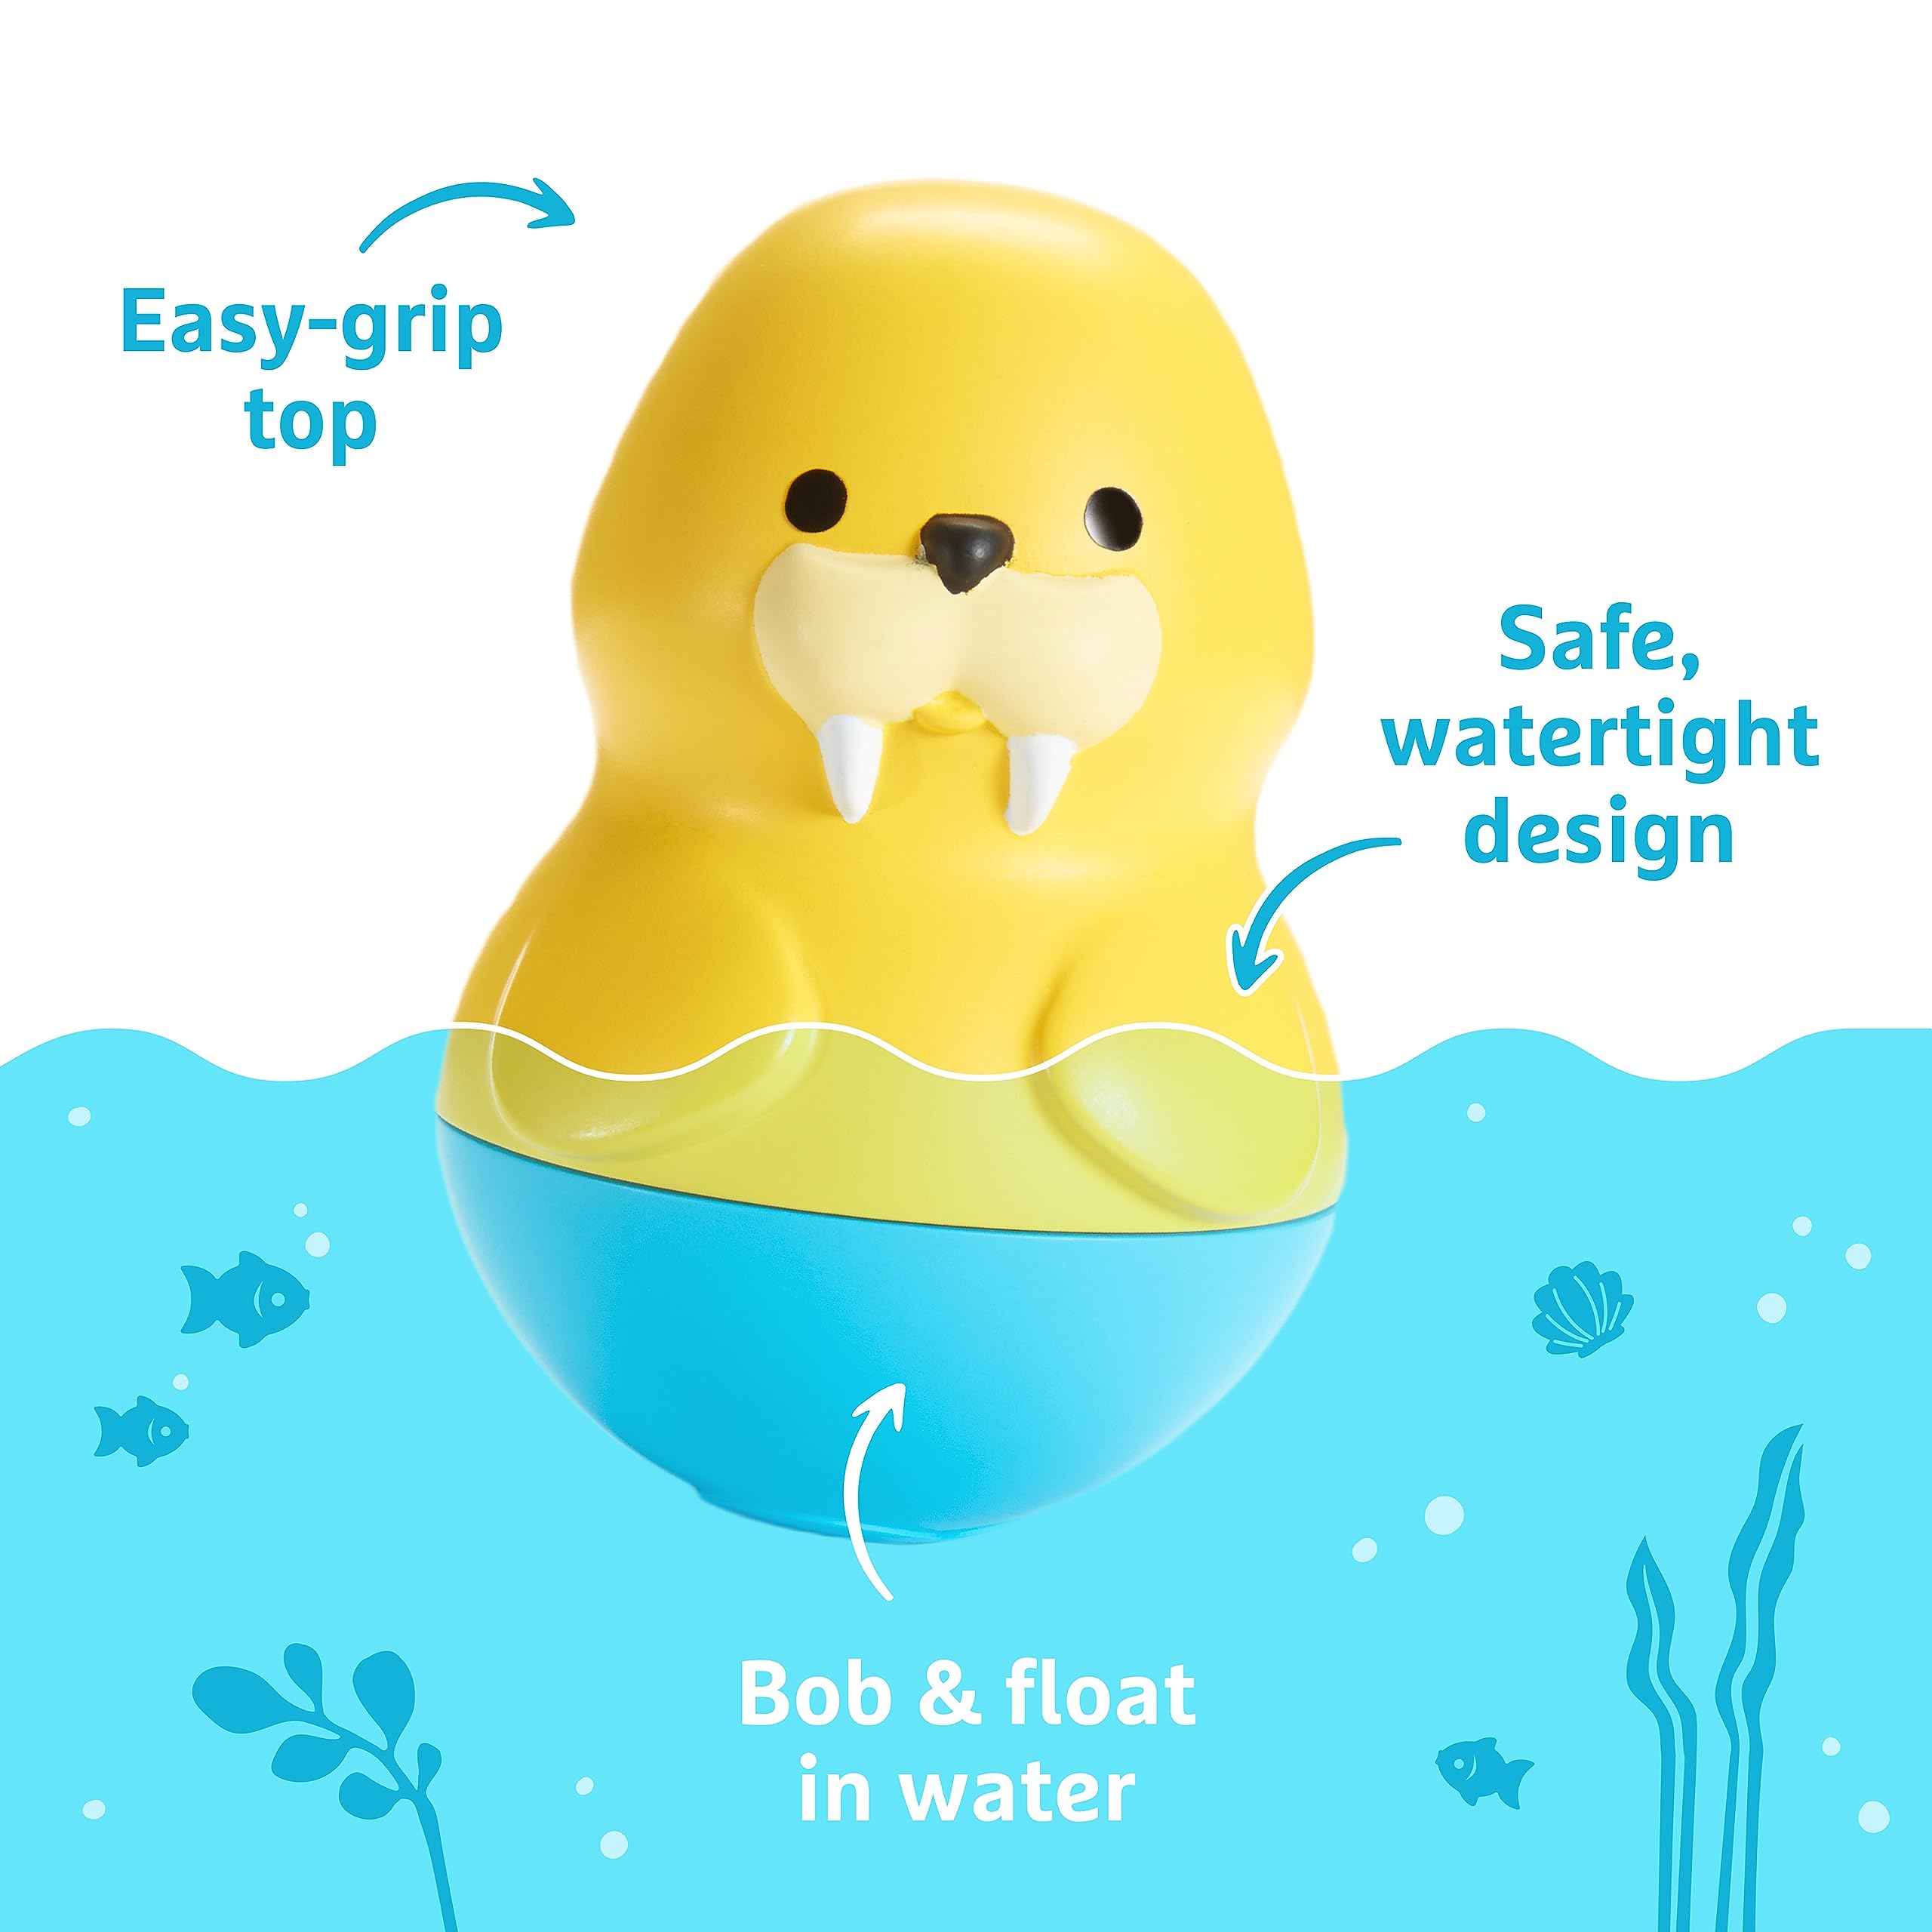 Munchkin® Bath Bobbers Baby and Toddler Bath Toy, Includes 3 Floating Marine Animals